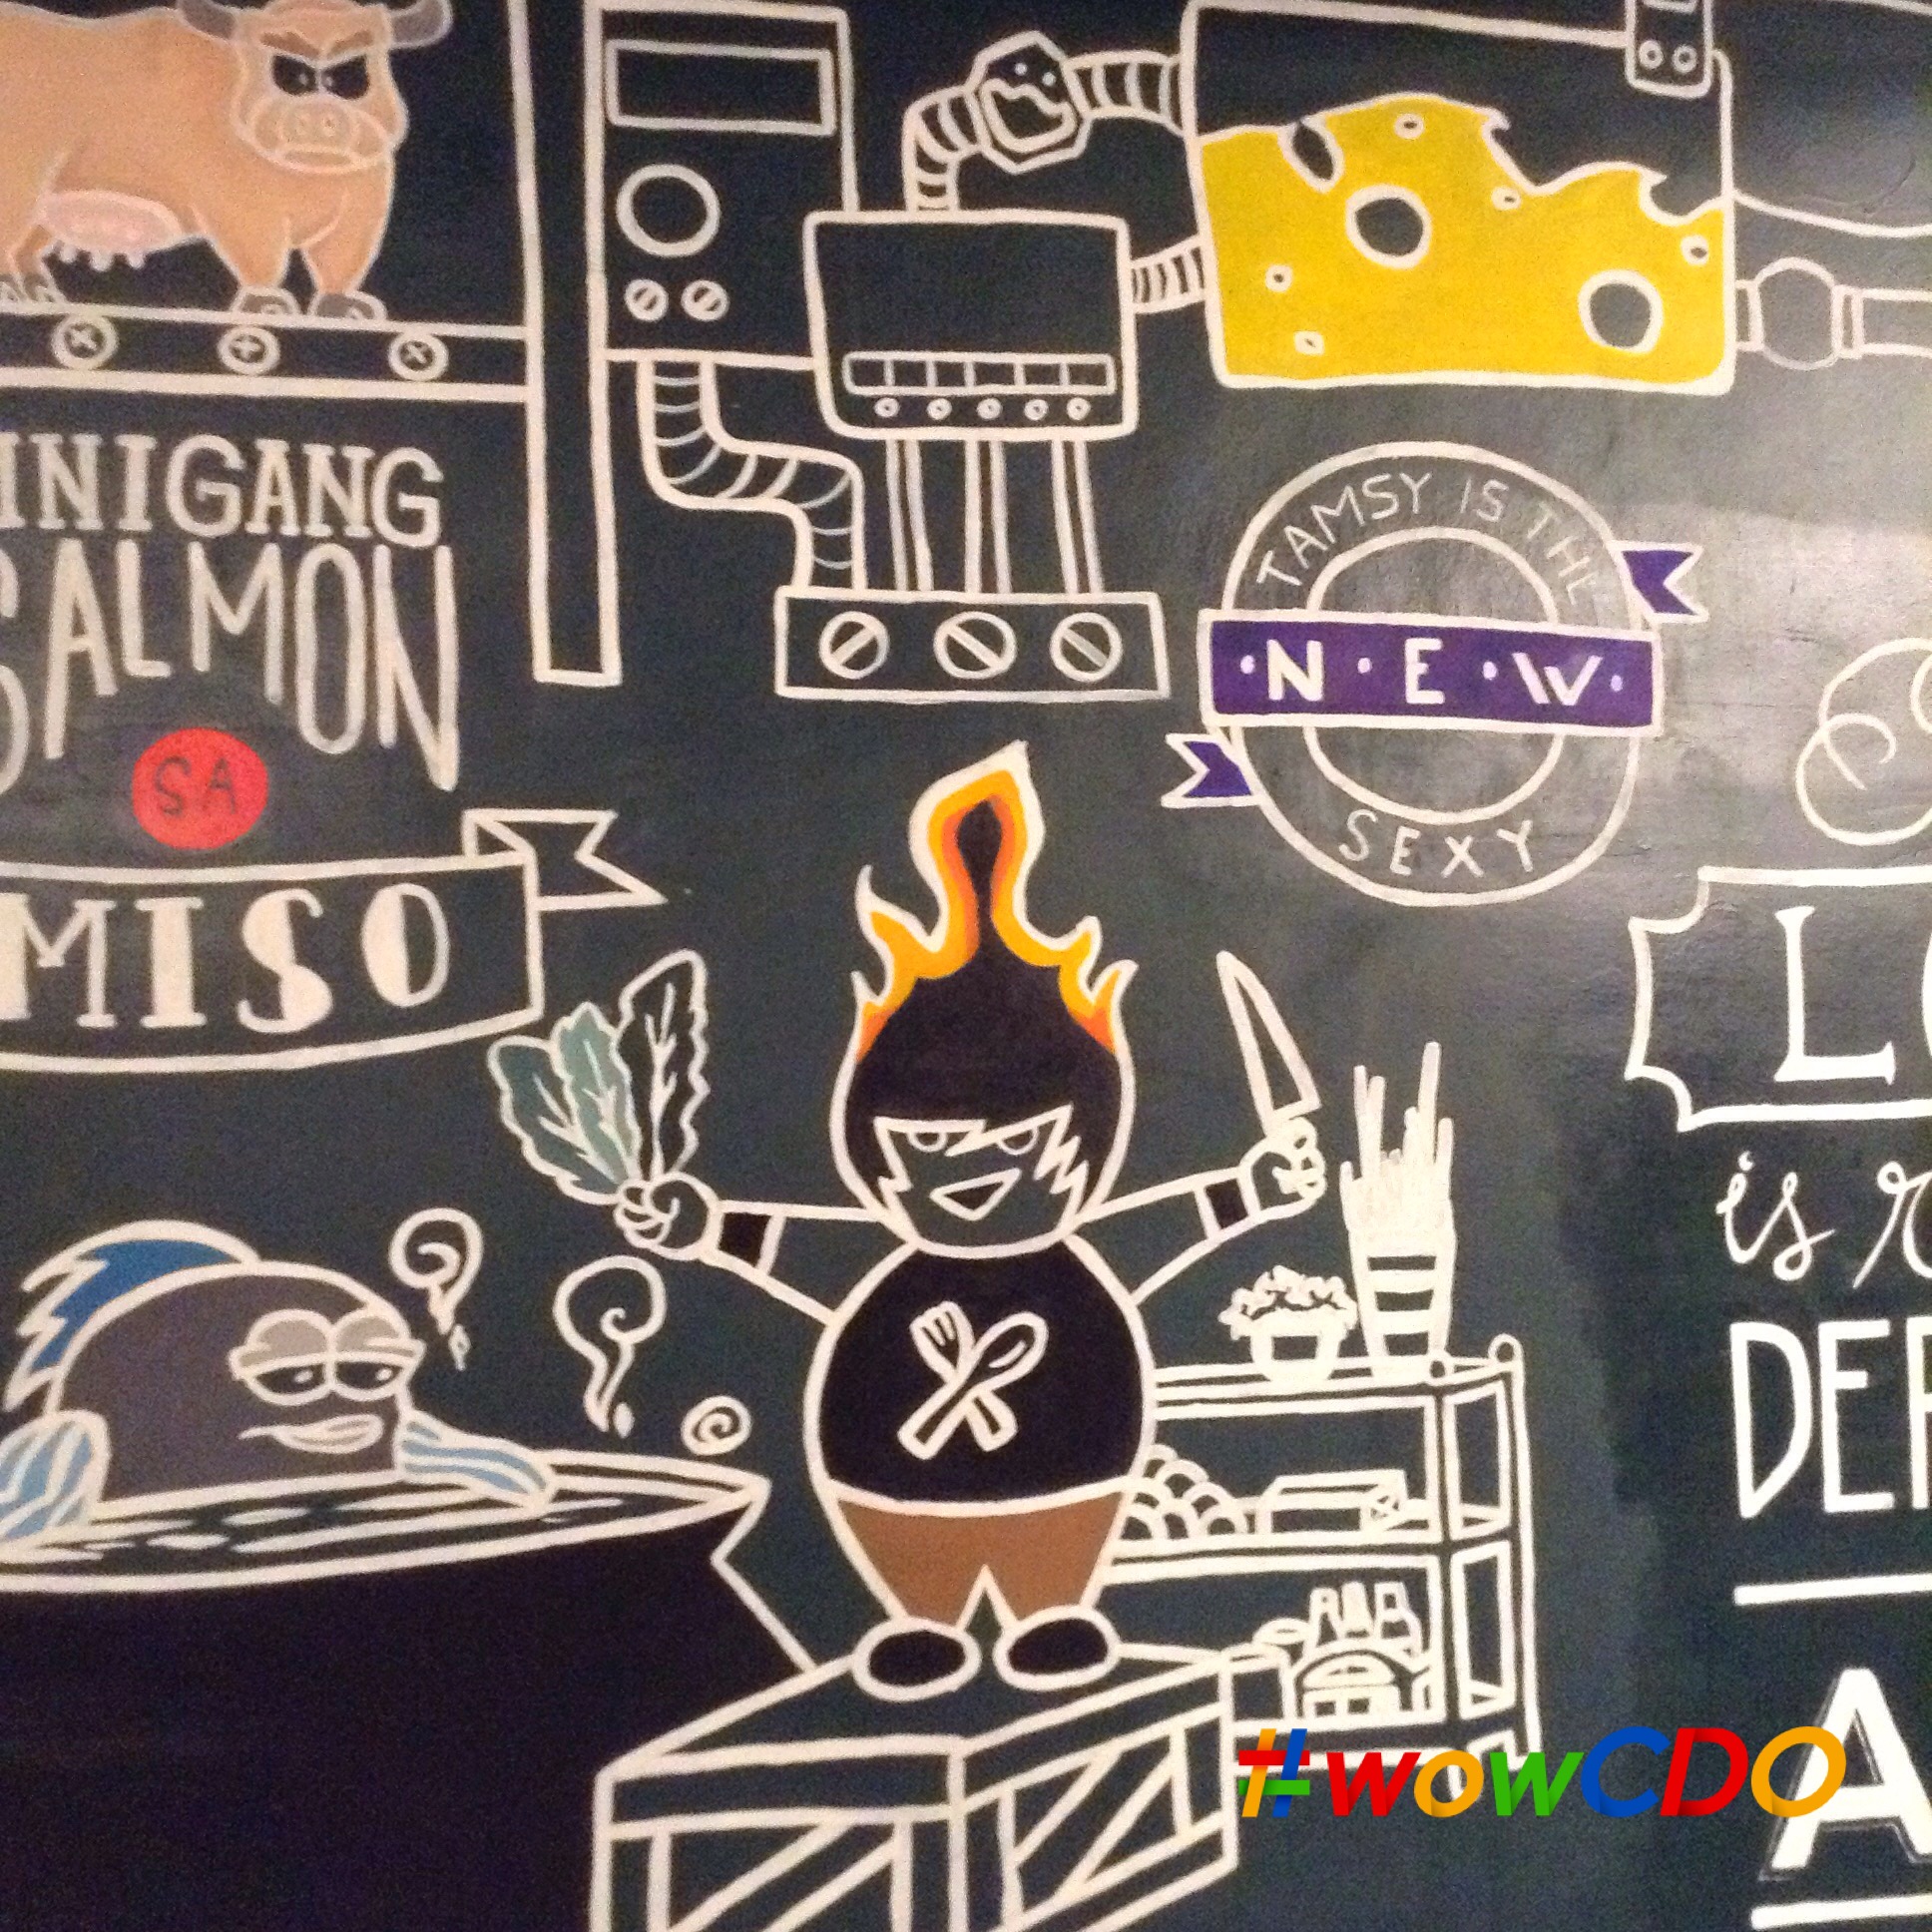 WATCH: TGIB at Boy Zugba, the Best Way to End Your Week in CDO